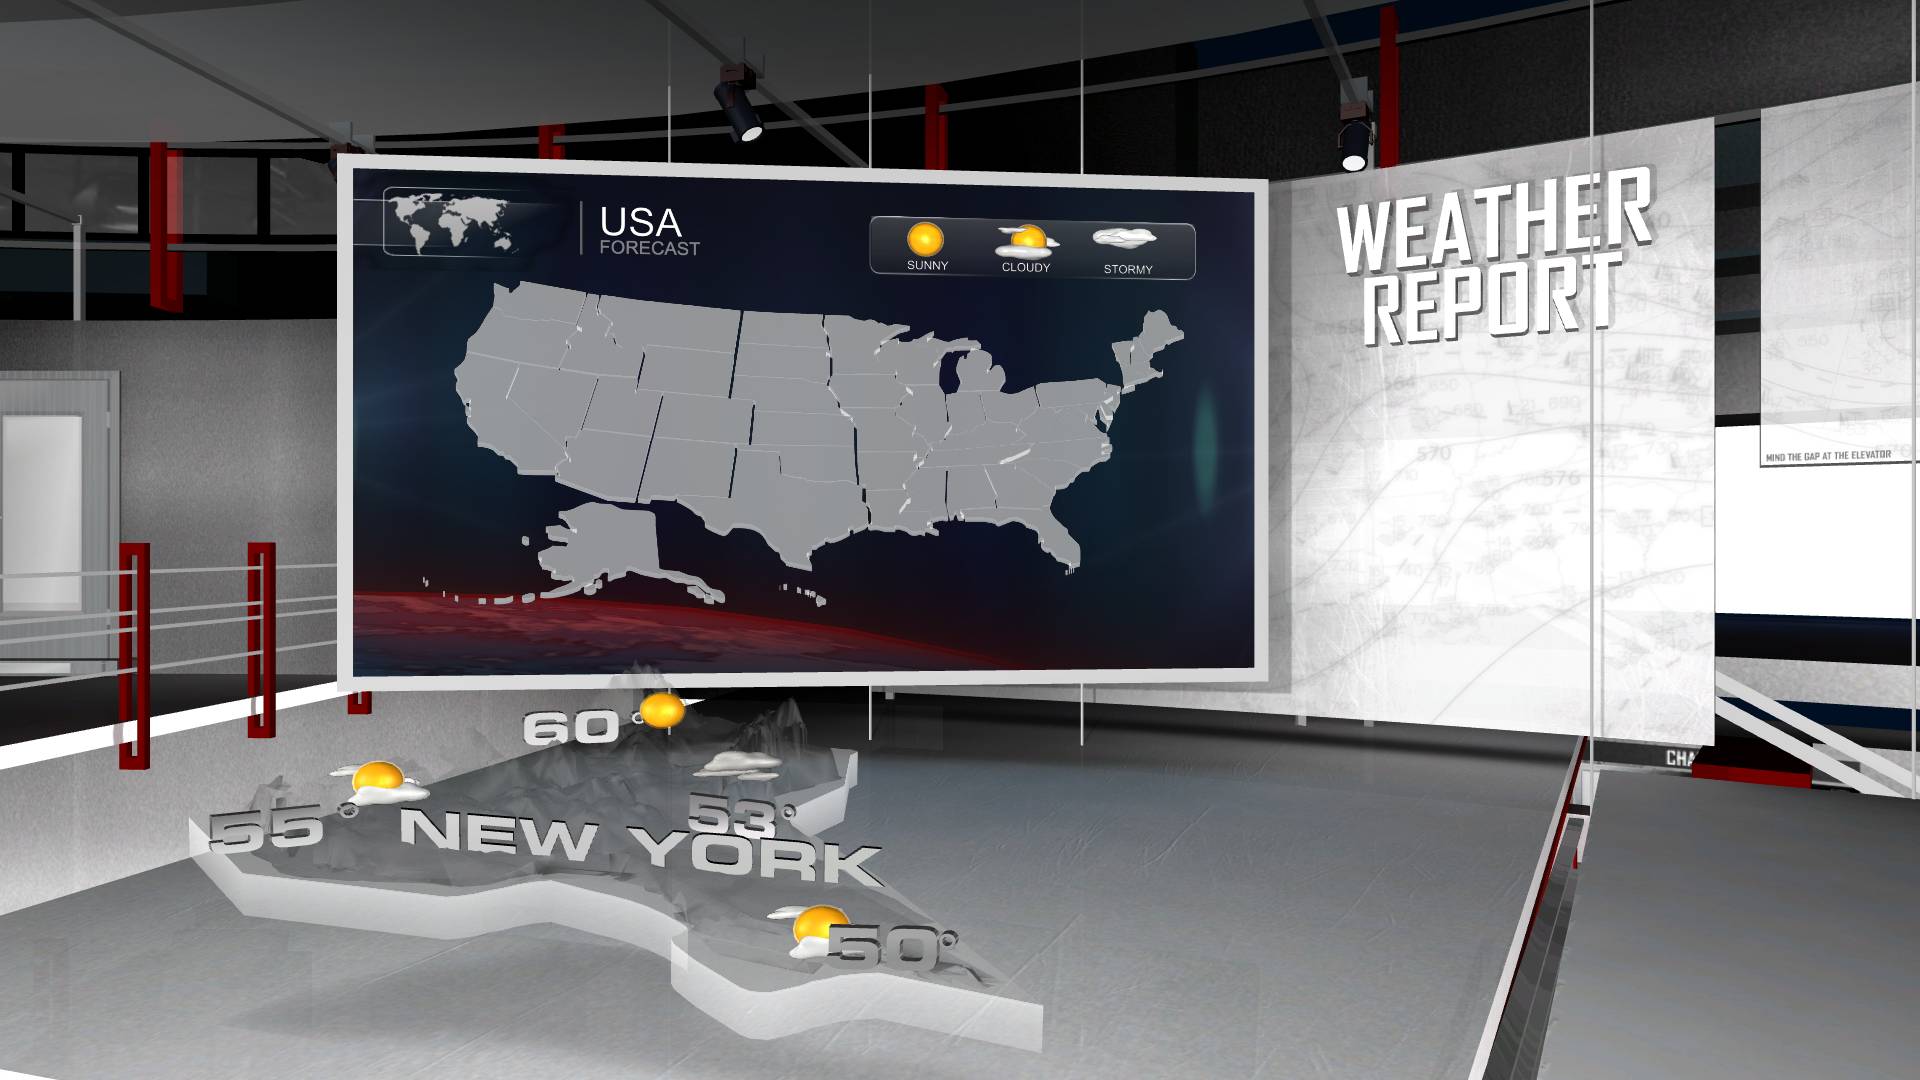 WEATHER REPORT - NAB 2014 | ON-AIR Graphics